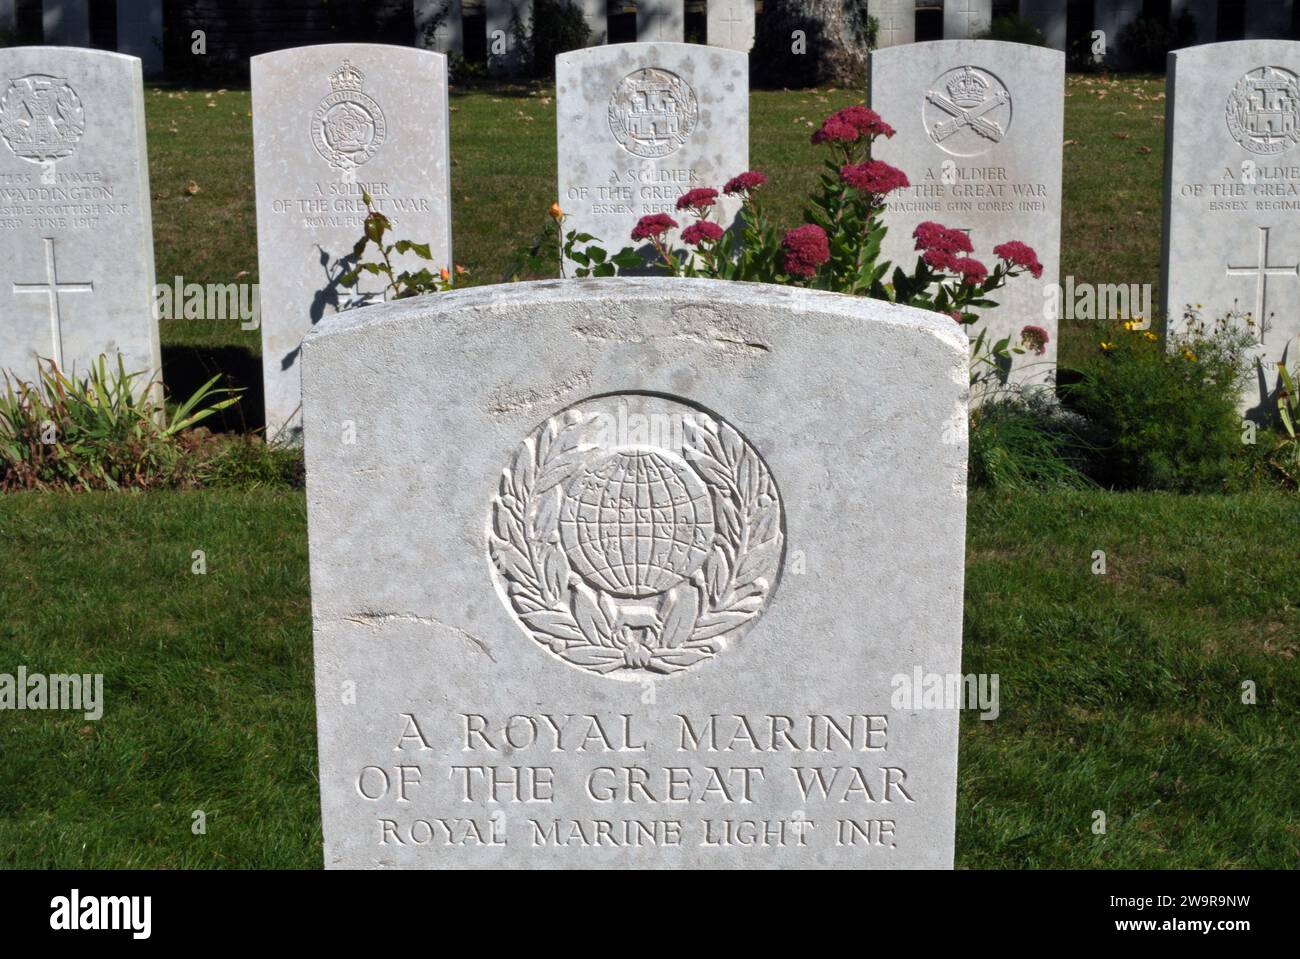 Headstones of Commonwealth soldiers killed in the First World War, in Canadian Cemetery No. 2 at the Canadian National Vimy Memorial Park in France. Stock Photo